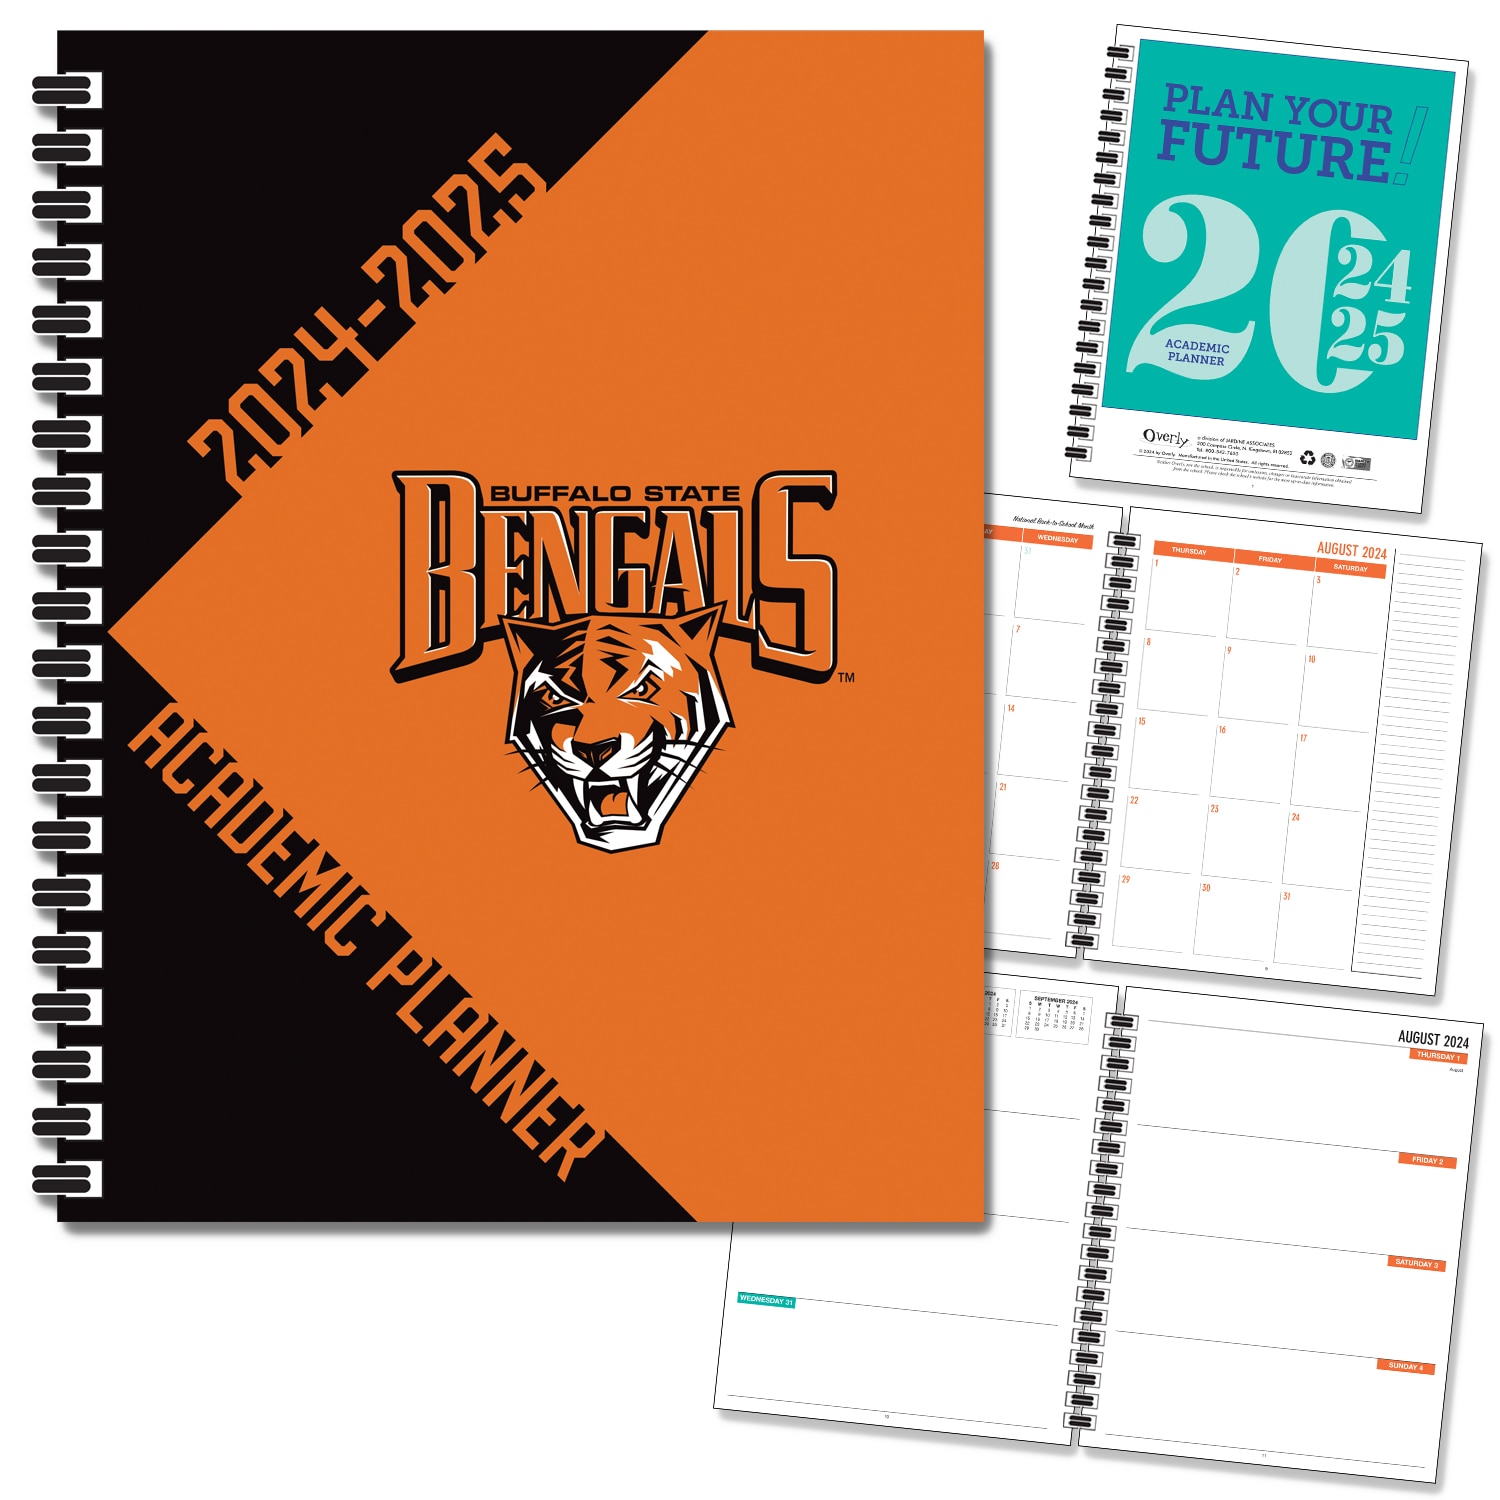 FY 25 Traditional Soft Touch Spot Varnish - Mascot Imprinted Planner 24-25 AY 7x9